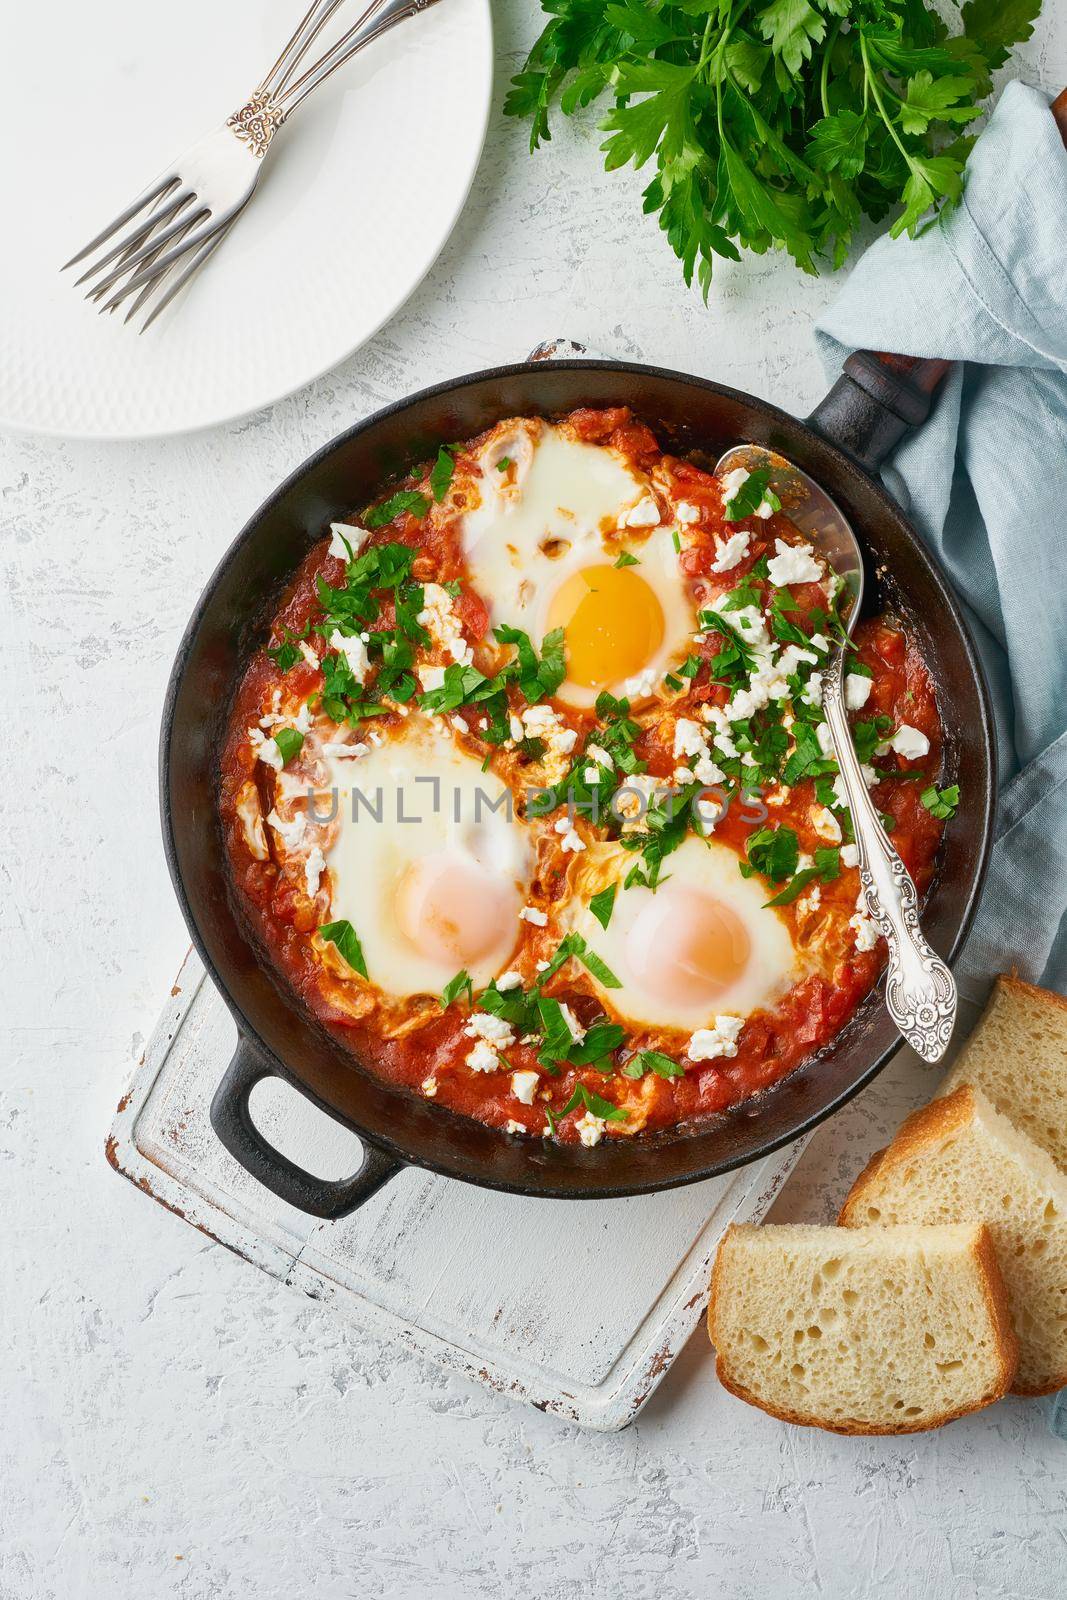 Shakshouka, eggs poached in sauce of tomatoes, olive oil. Mediterranean cuisine. by NataBene